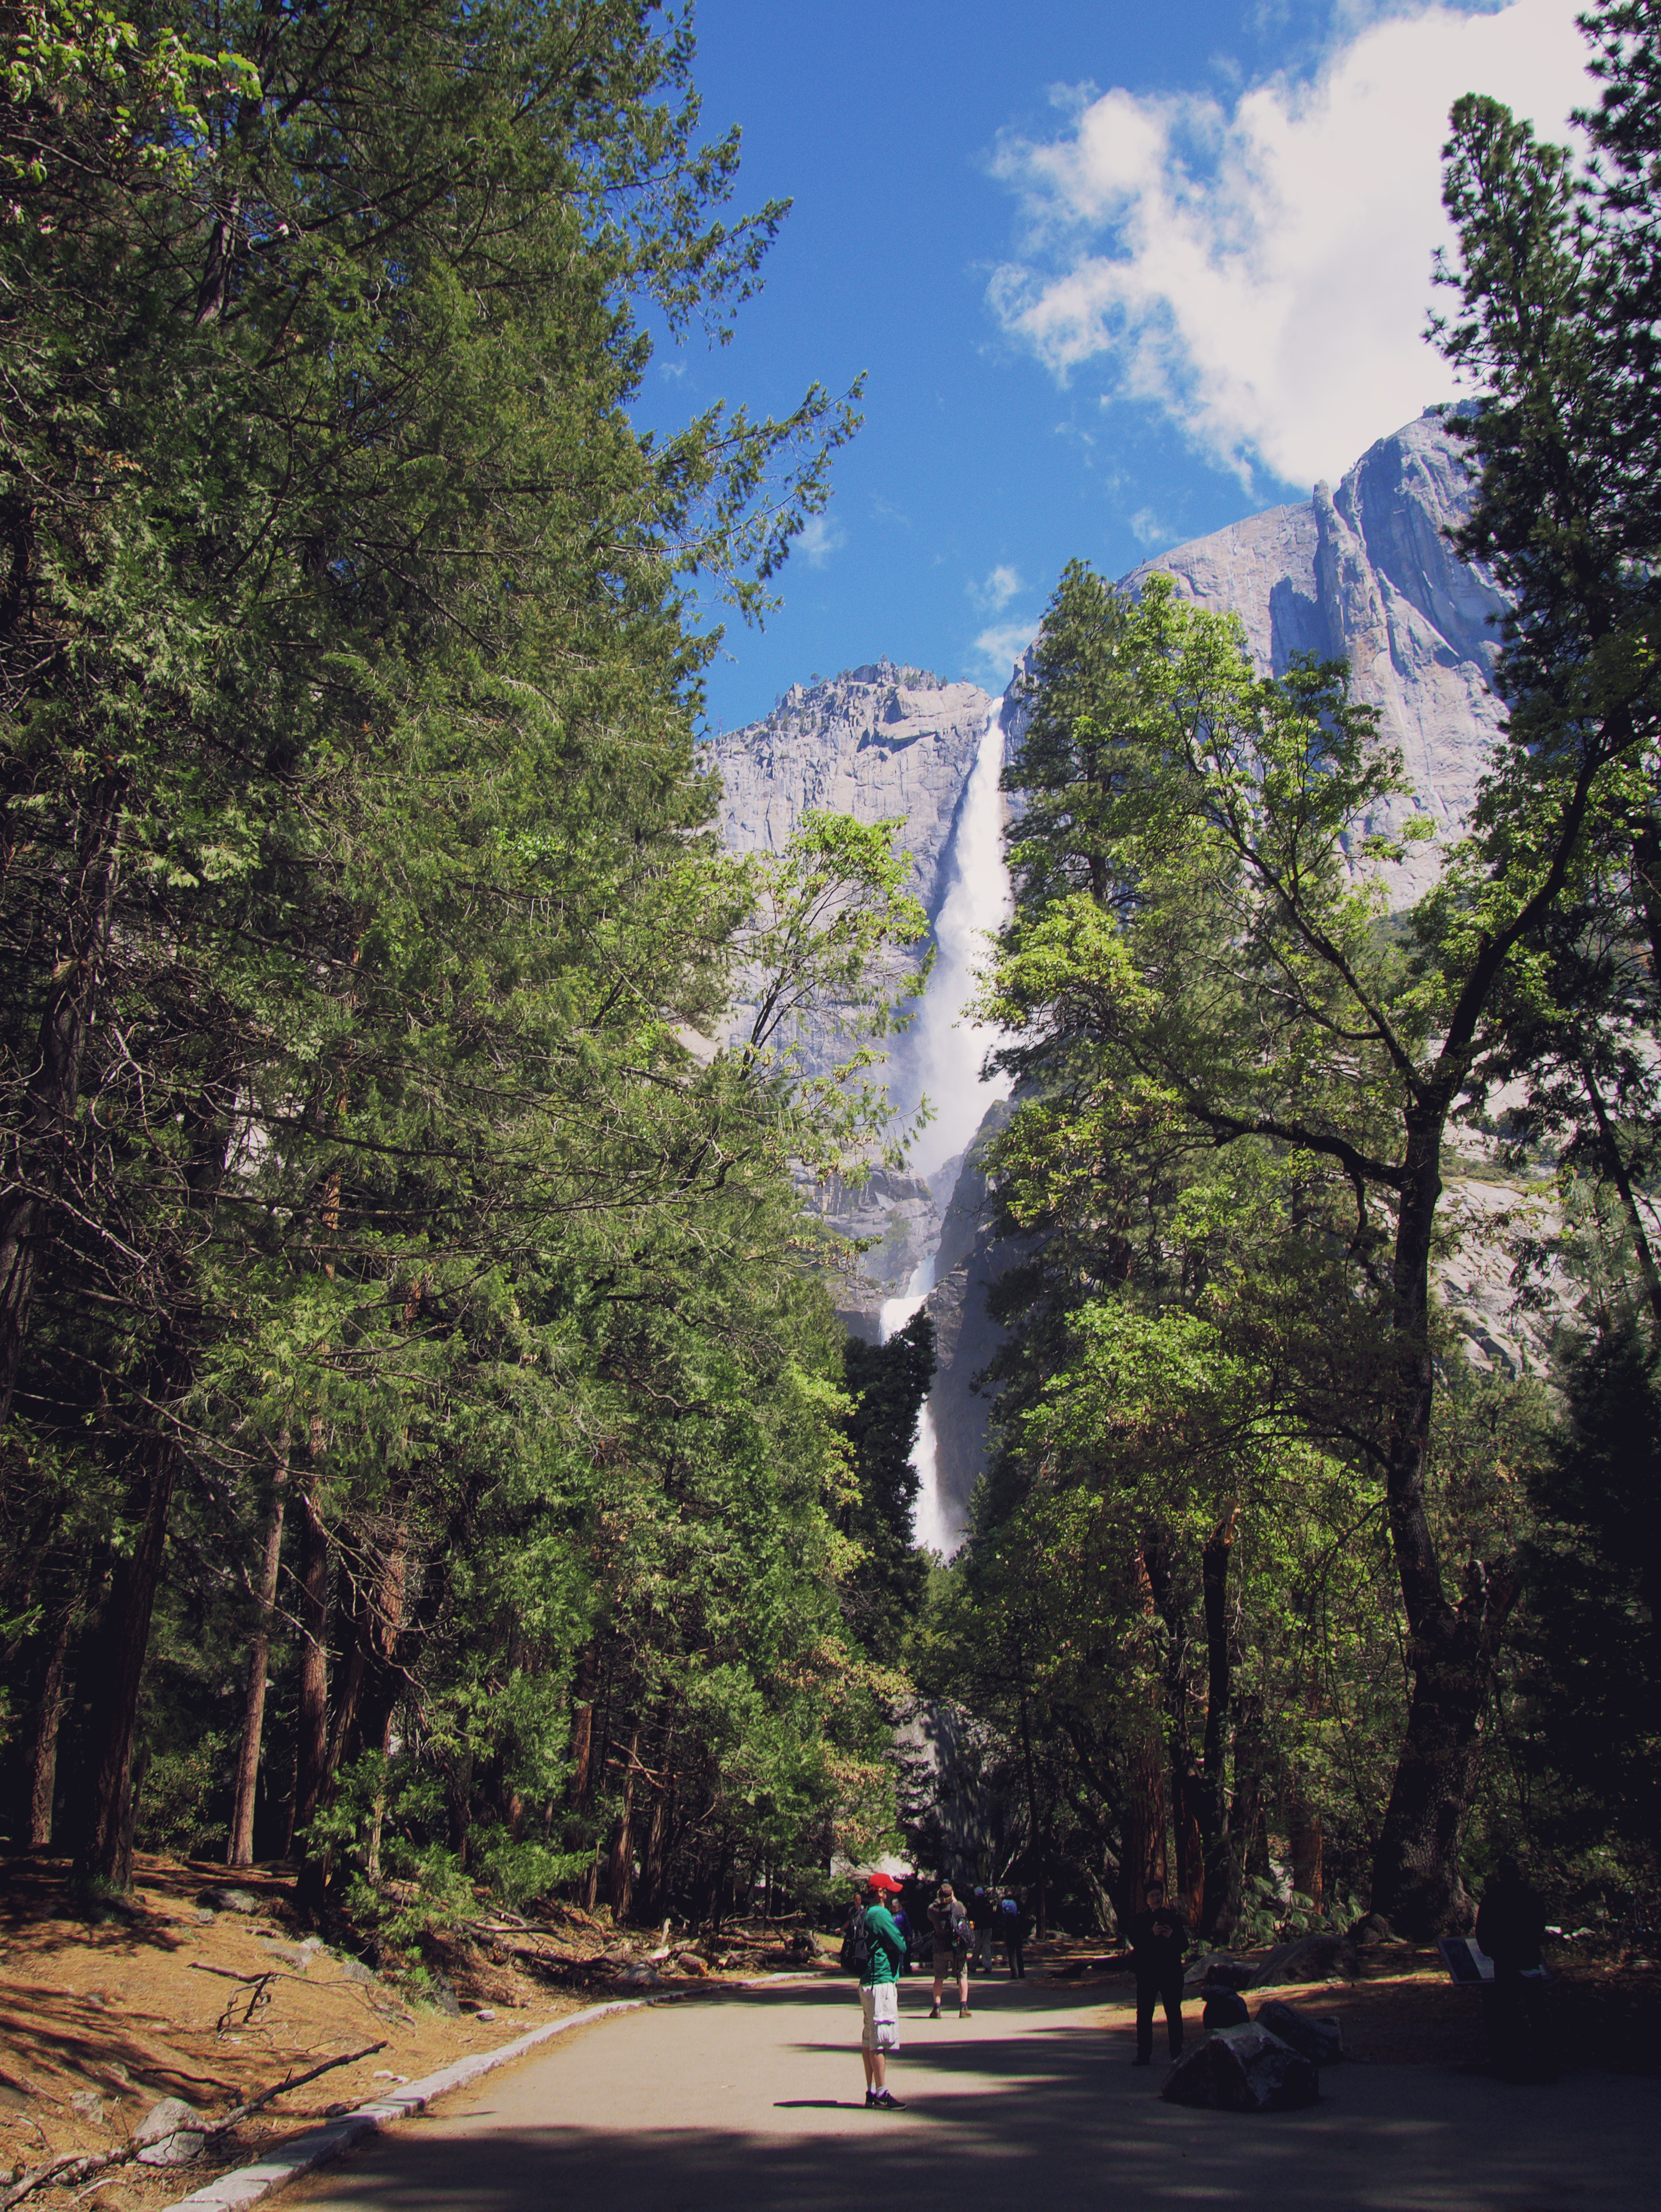 View of Yosemite Falls from the trail